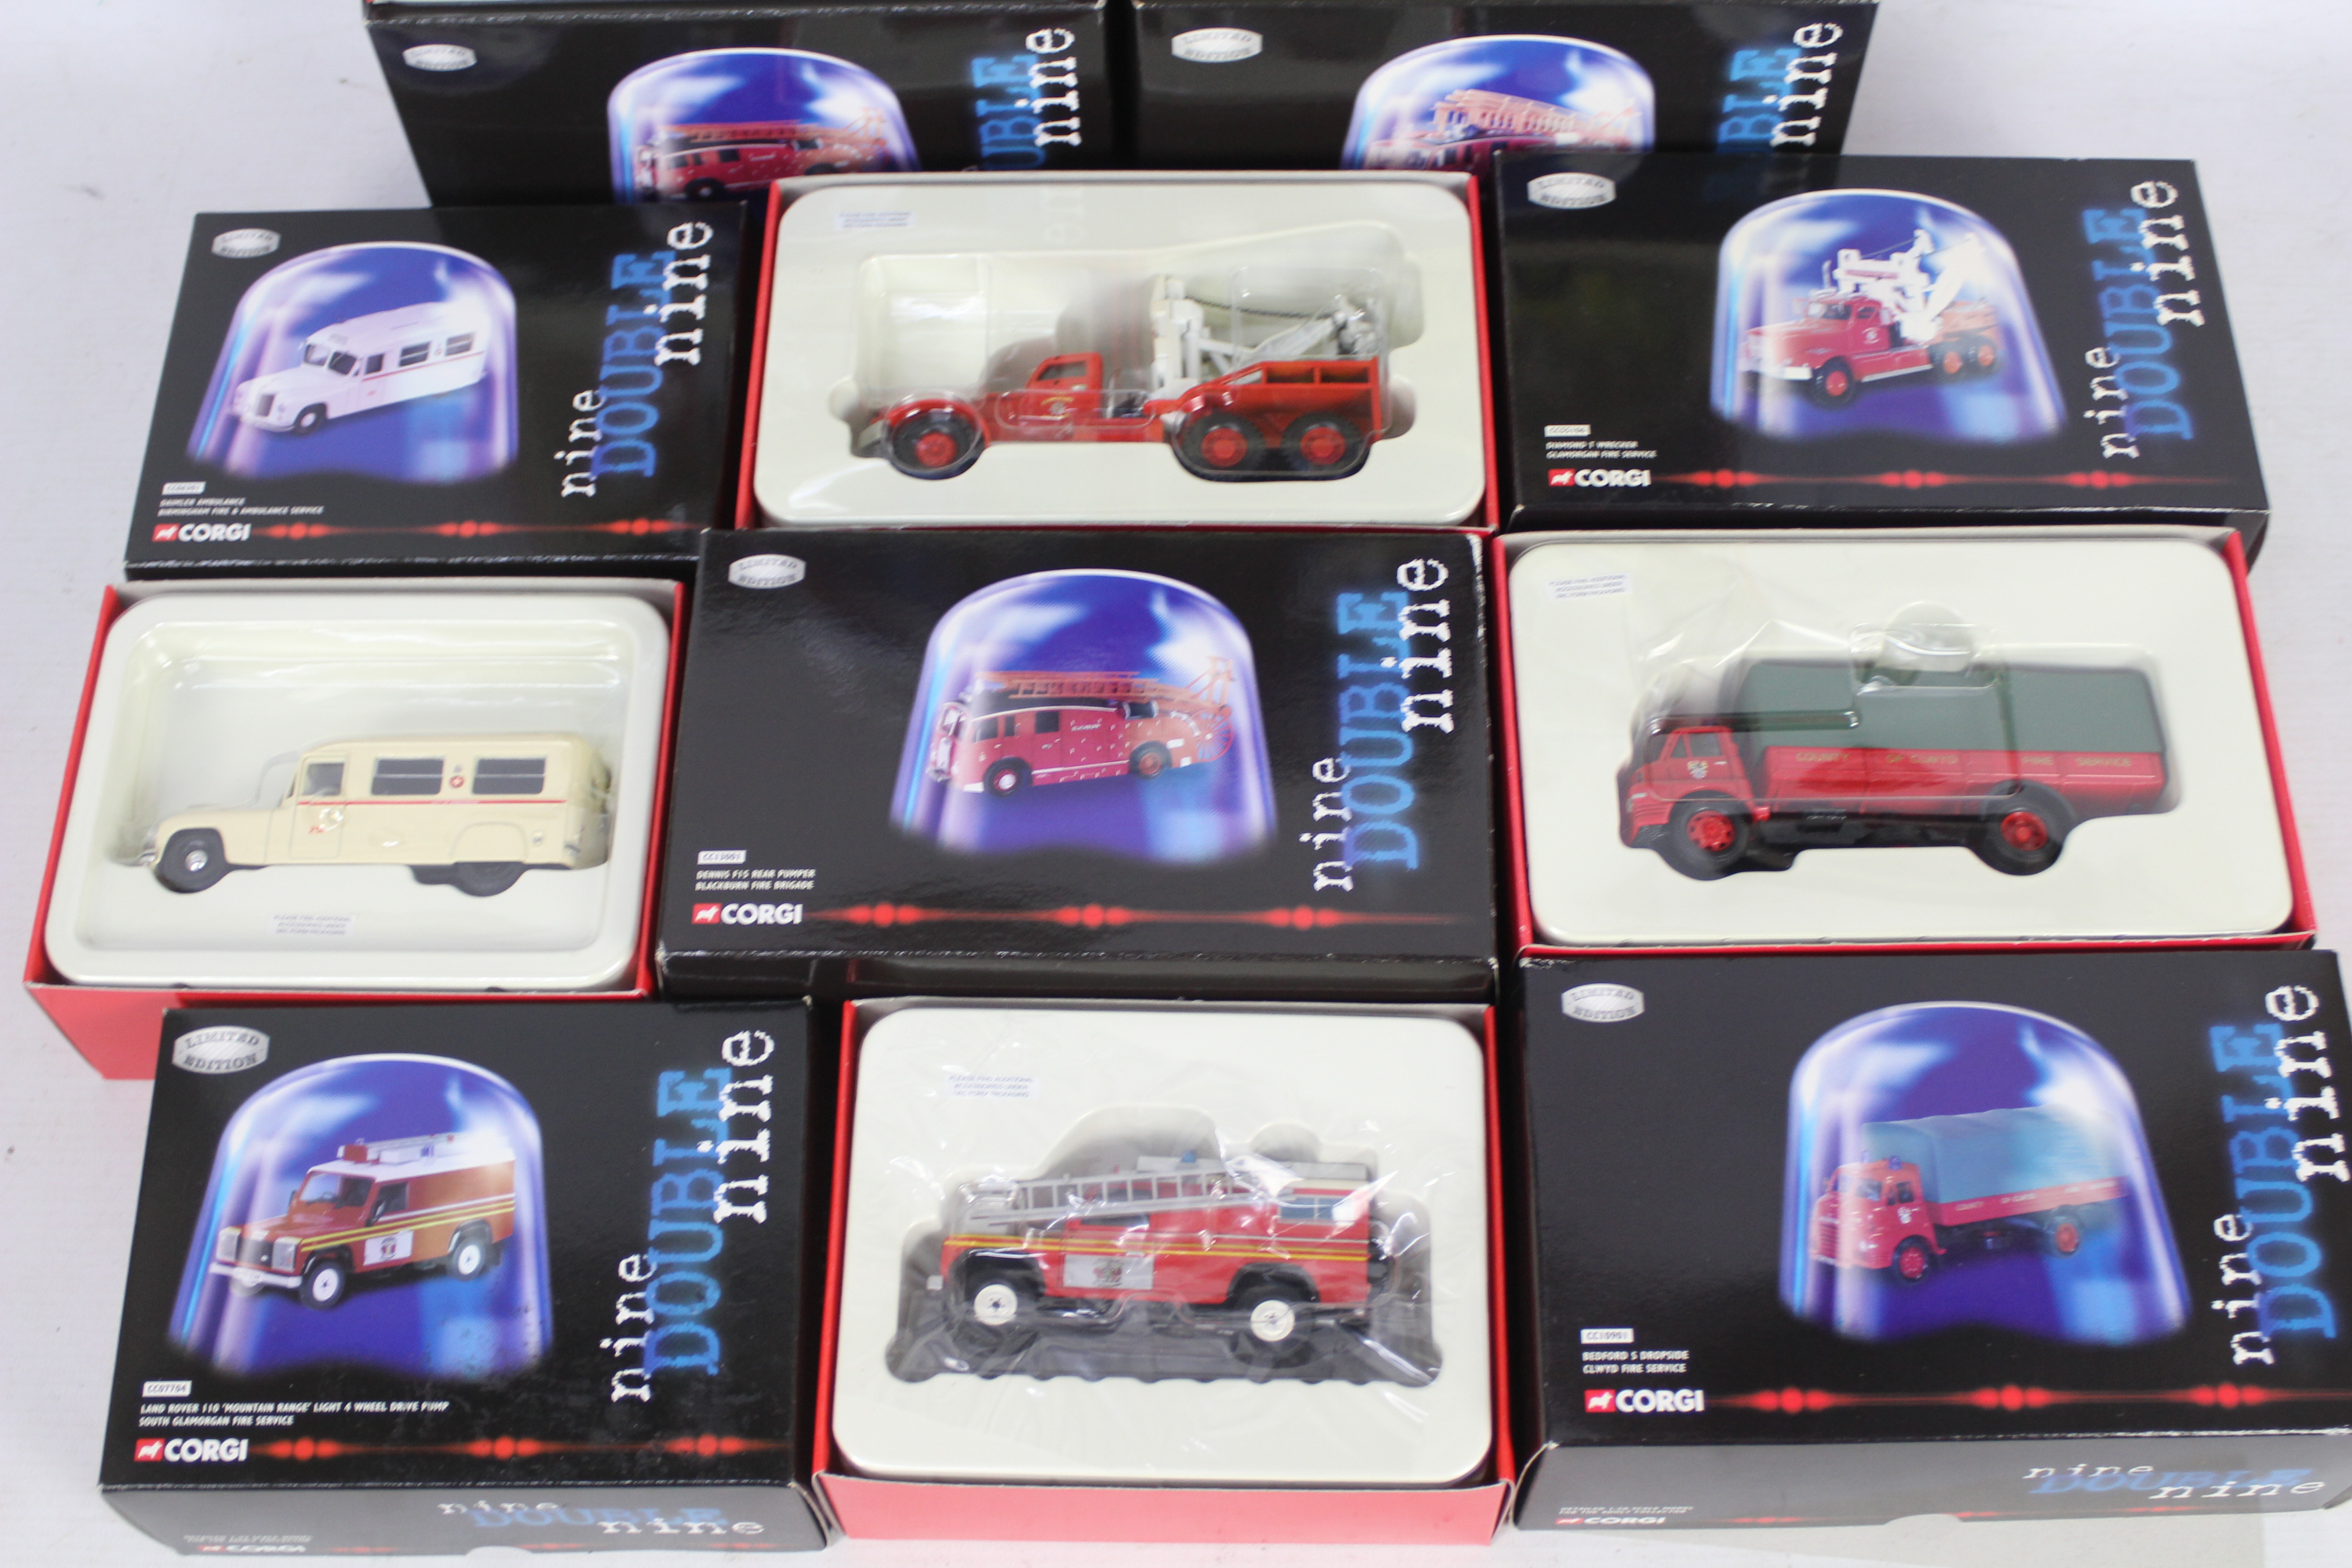 Corgi - A squad of 10 boxed Limited Edition Corgi diecast emergency vehicles and Fire appliances - Image 2 of 3